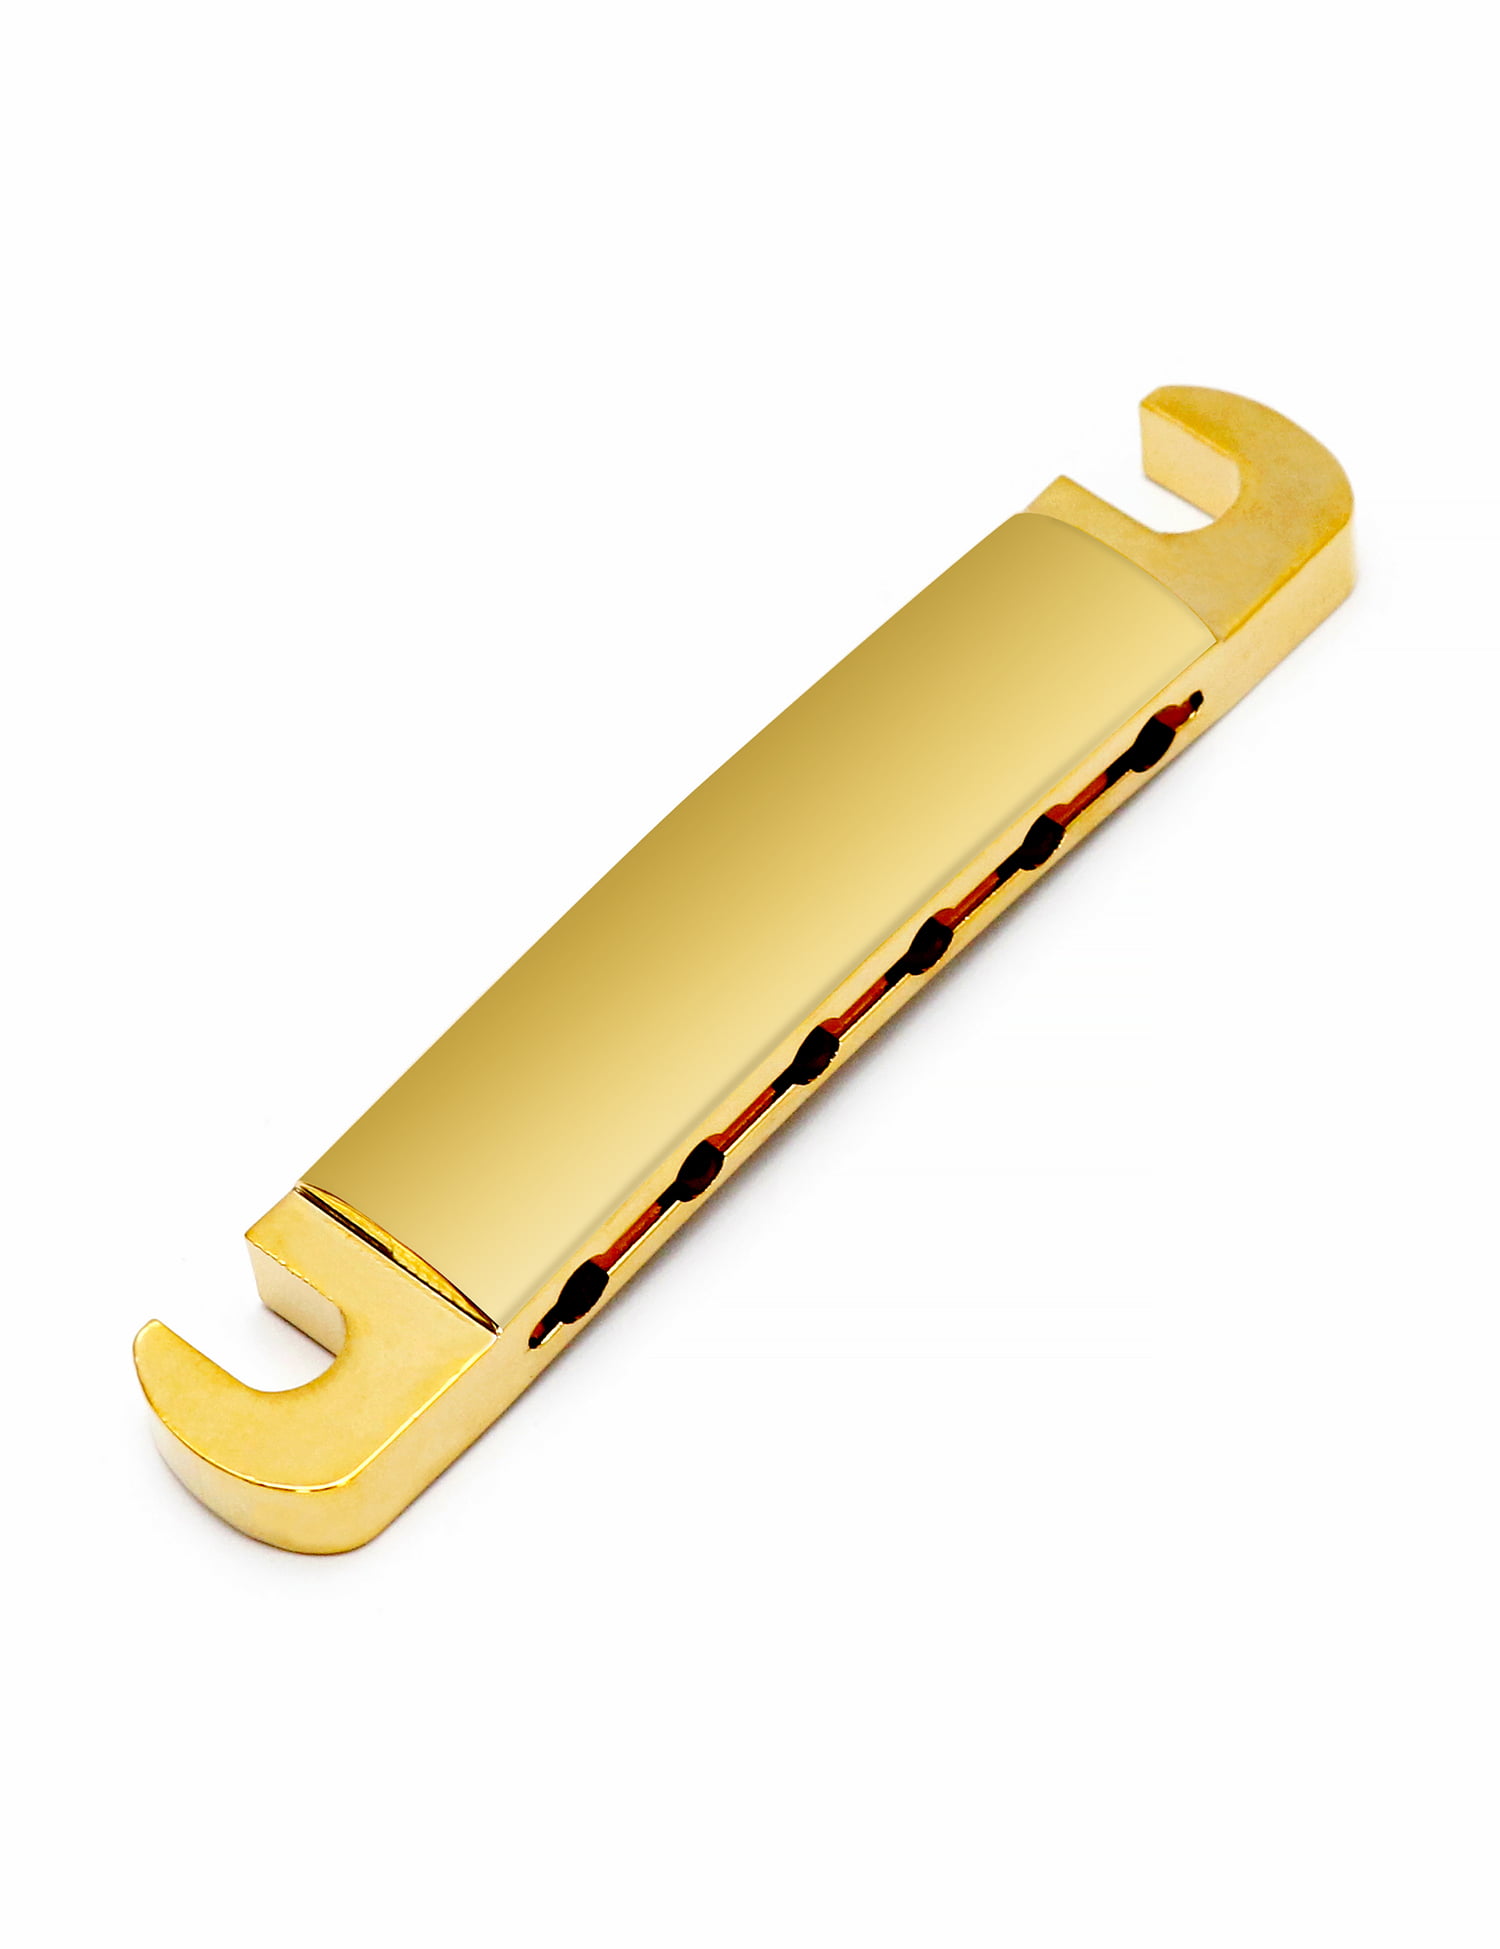 Metallor Tune-O-Matic Style Guitar Stop Bar Tailpiece for LP Les Paul SG Style Electric Guitar Parts Replacement Gold. 